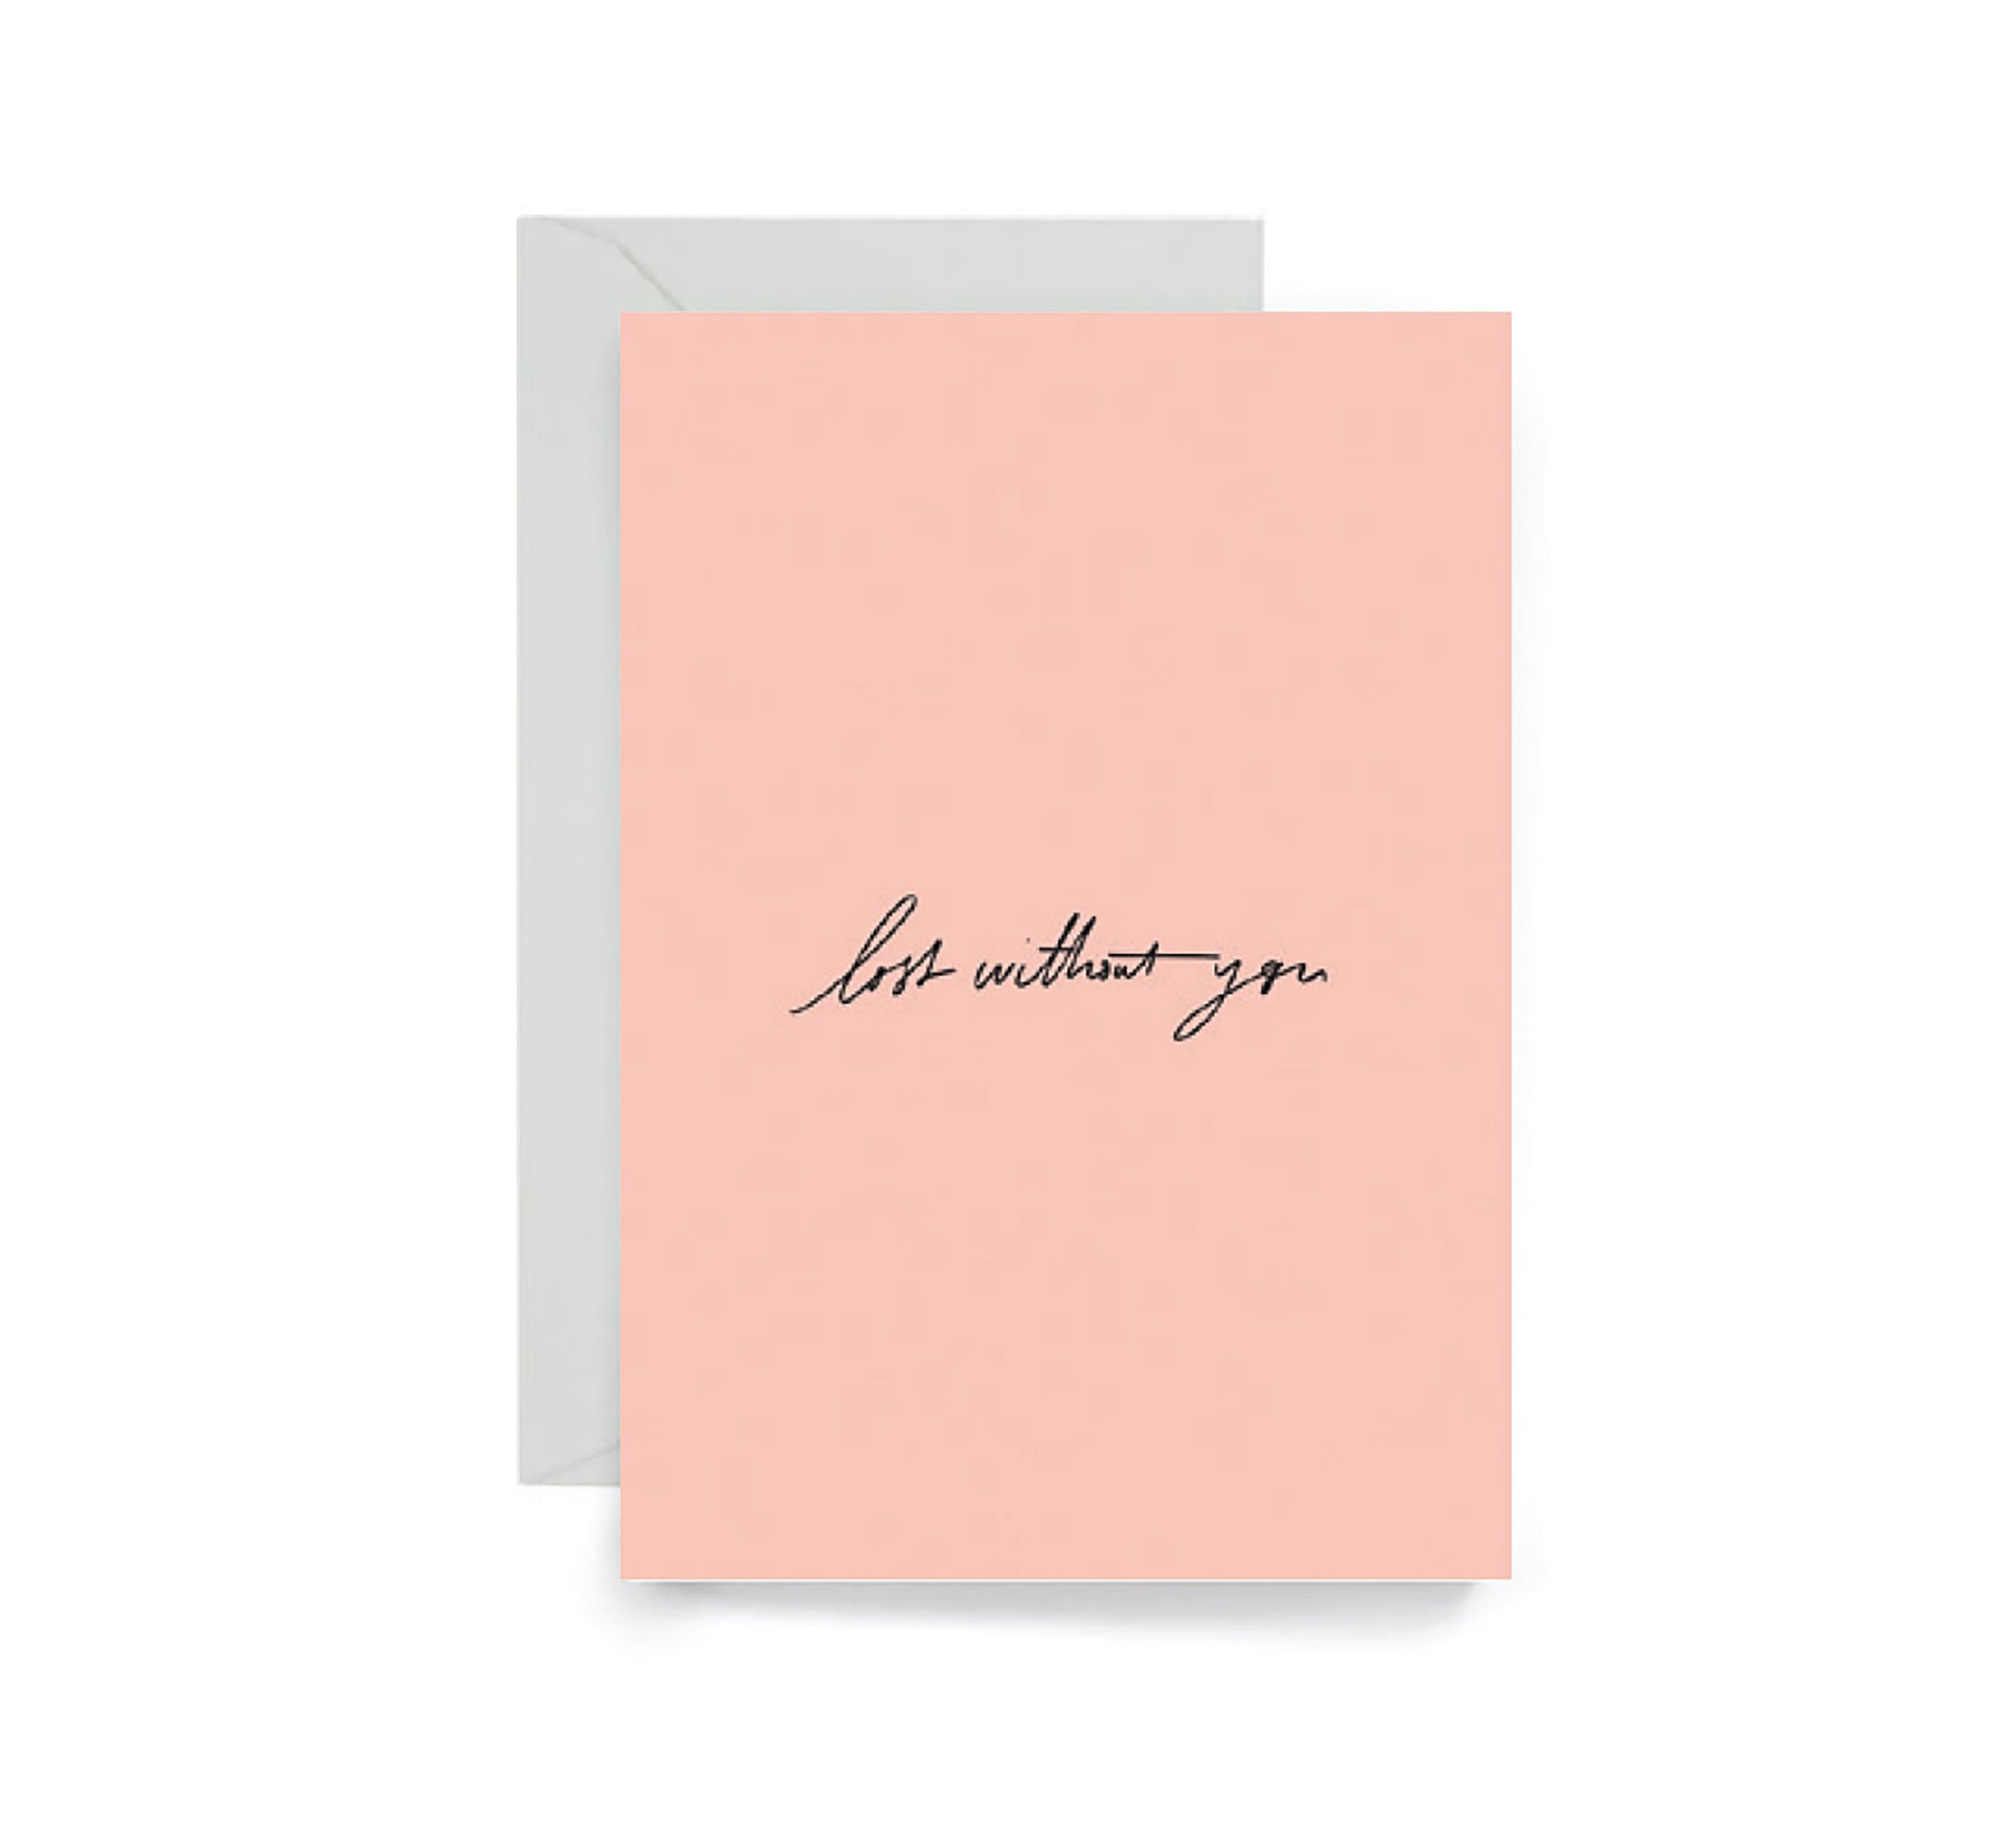 15. LOST WITHOUT YOU CARDS - (PACK OF 6)